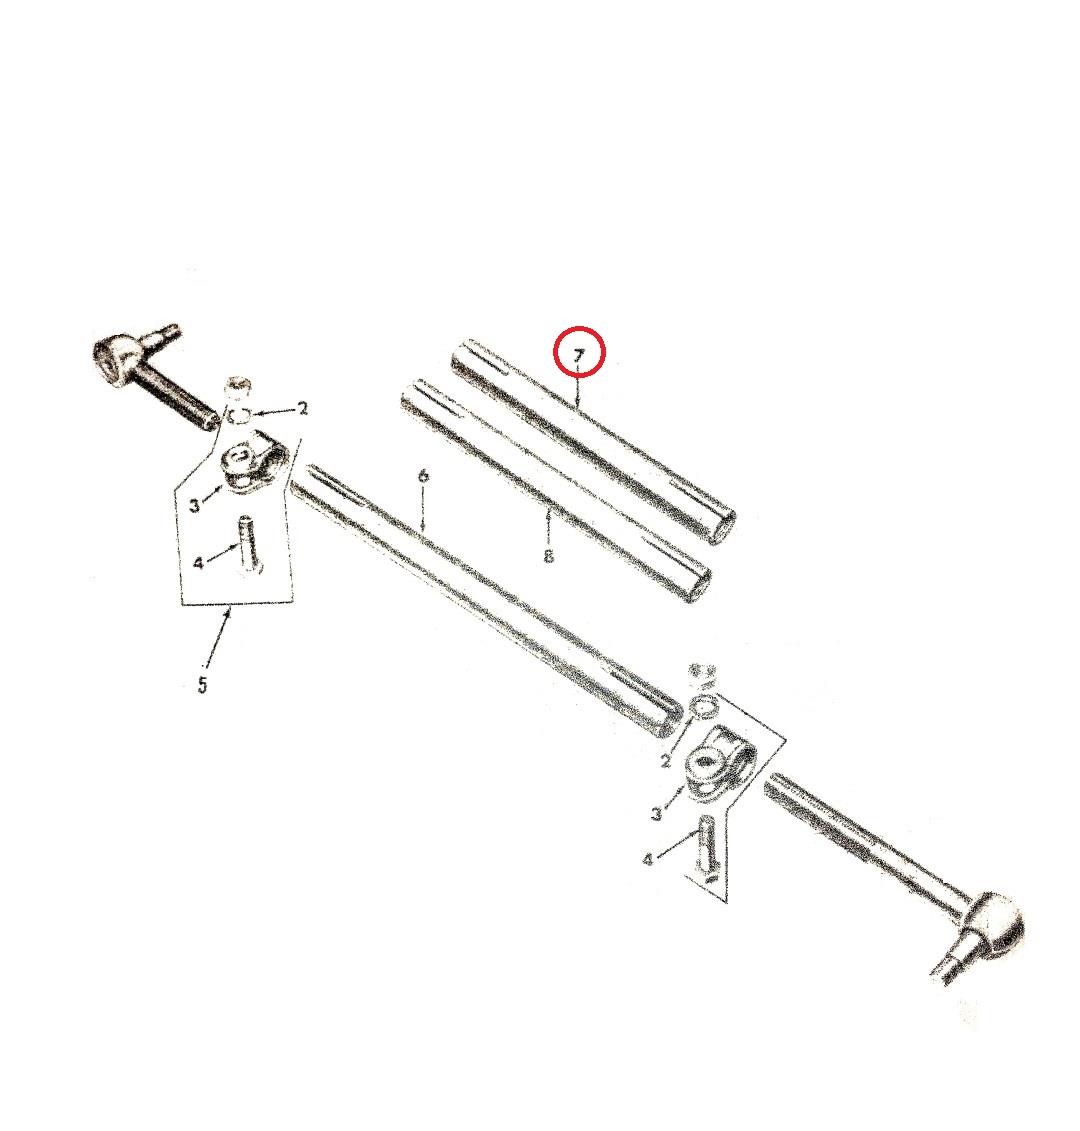 MU-189 | MU-189 Steering Linkage Drag Link Assembly with Small Sleeve Mule M274 Parts Diagram (Large).JPG